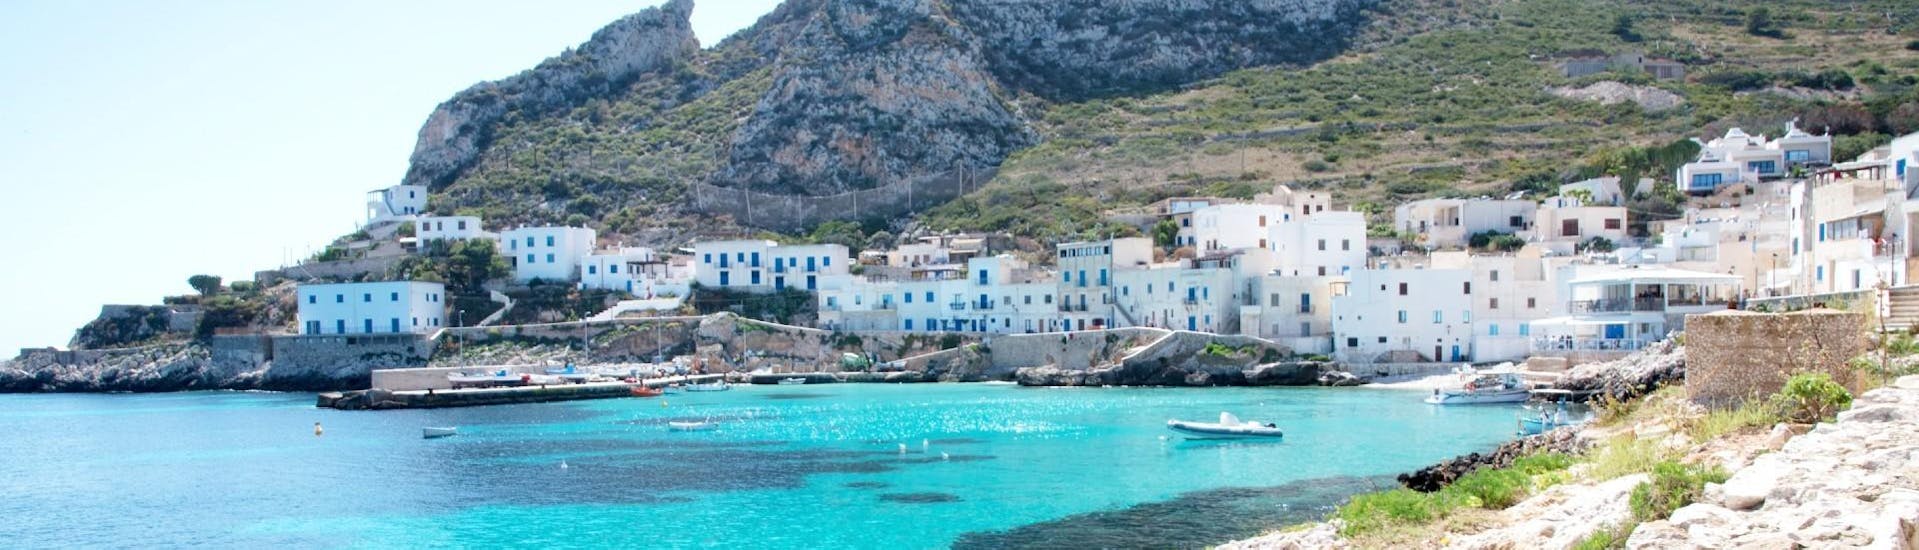 The stunning island of Levanzo that you can visit during the boat trip to Favignana and Levanzo with Lunch with Egadi Escursioni.